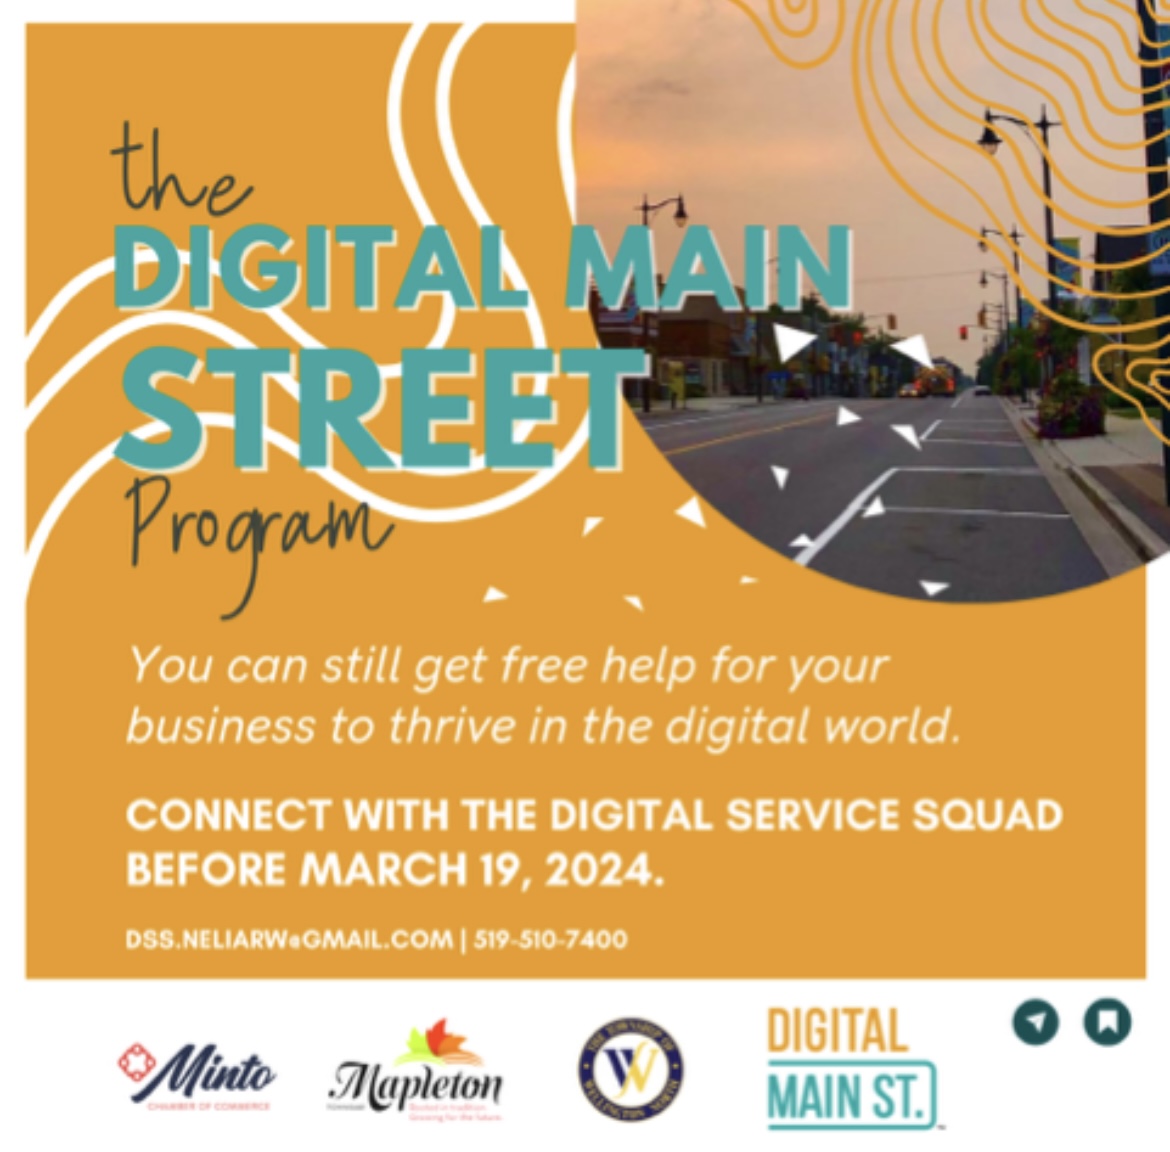 💻 email dss.neliarw@gmail.com or 📞 phone call 519-510-7400 Or visit digitalmainstreet.ca
#DigitalMainStreet   #DigitalMarketing   #DigitalServiceSquad   #DayInTheLife   #MeetTheDSS   #OntarioBusinesses #mintotownshipsmallbusiness